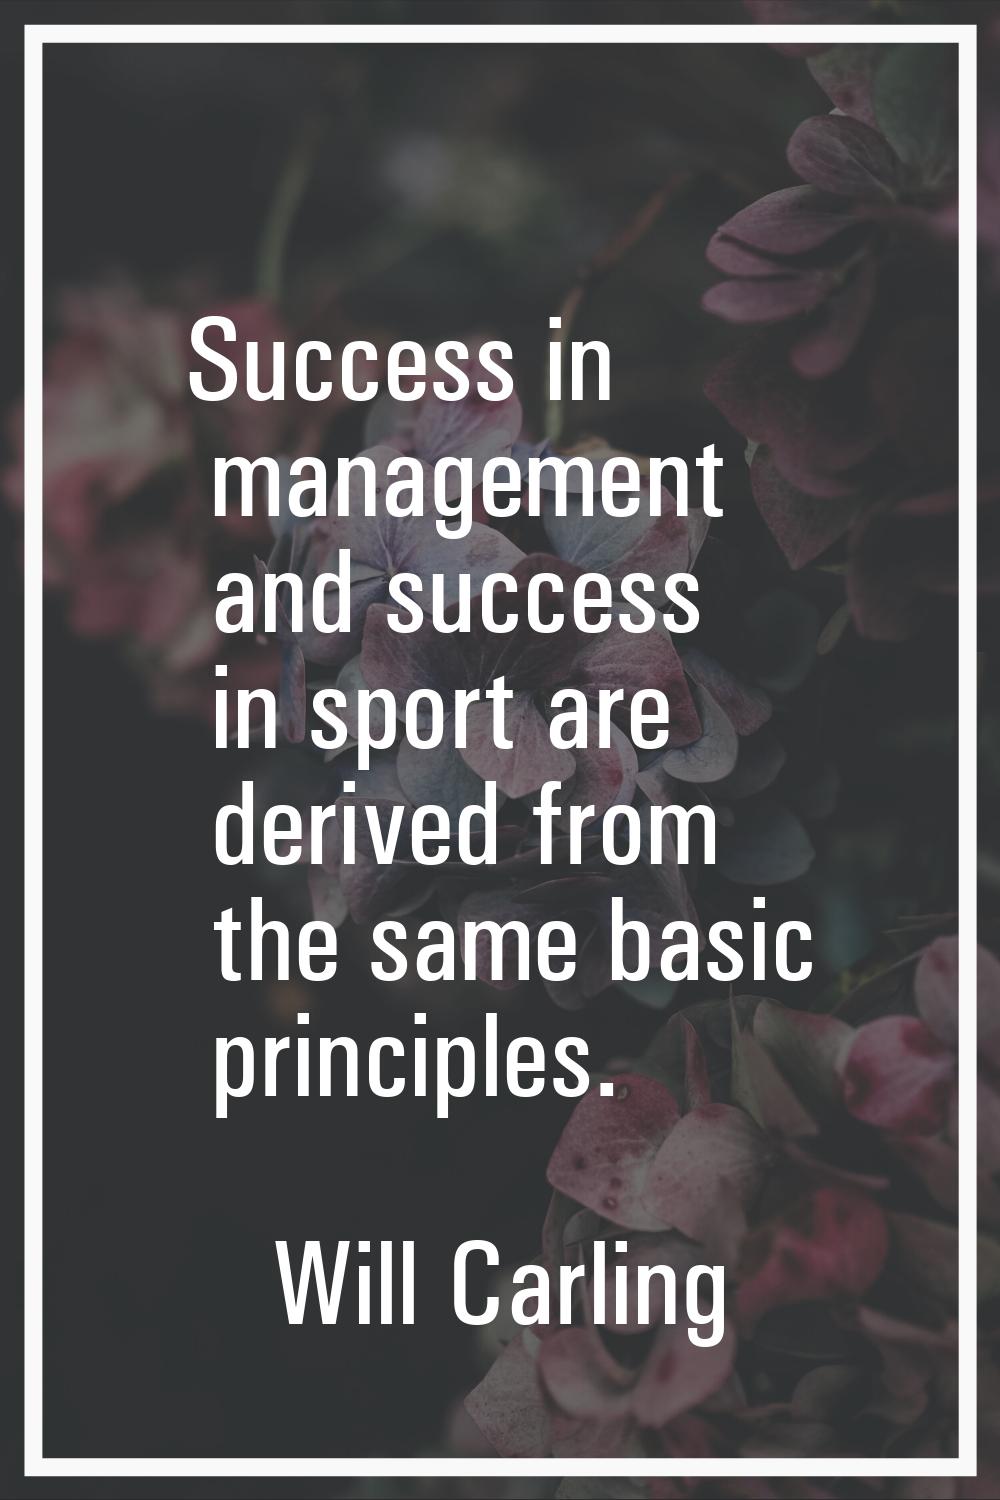 Success in management and success in sport are derived from the same basic principles.